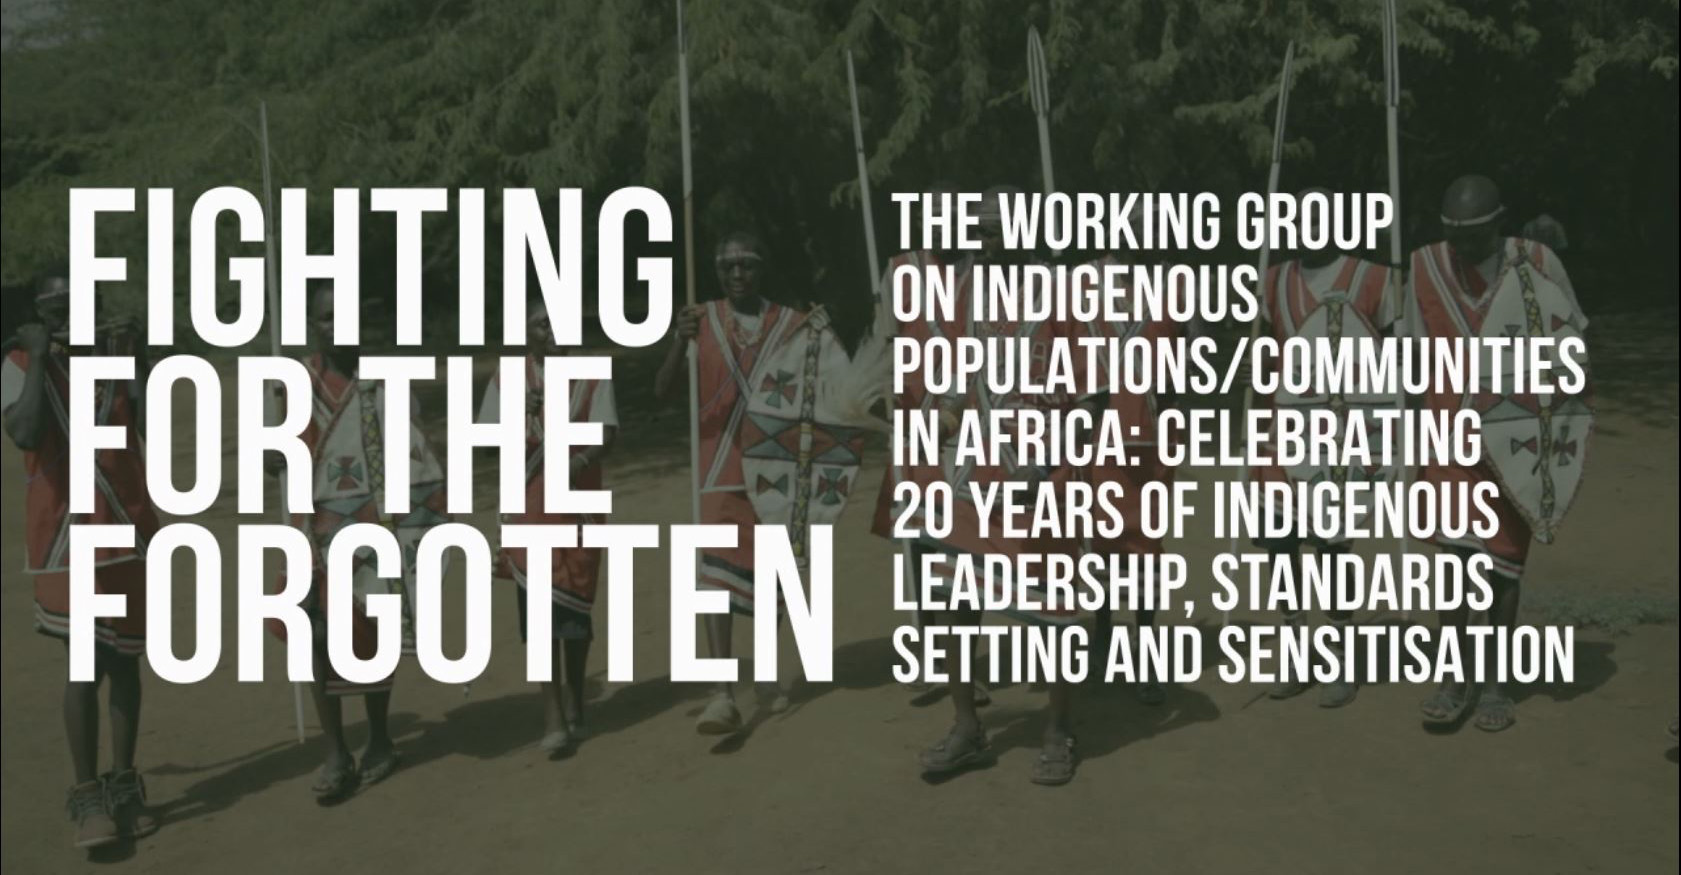 Fighting for the Forgotten: The Working Group on Indigenous Populations / Communities in Africa